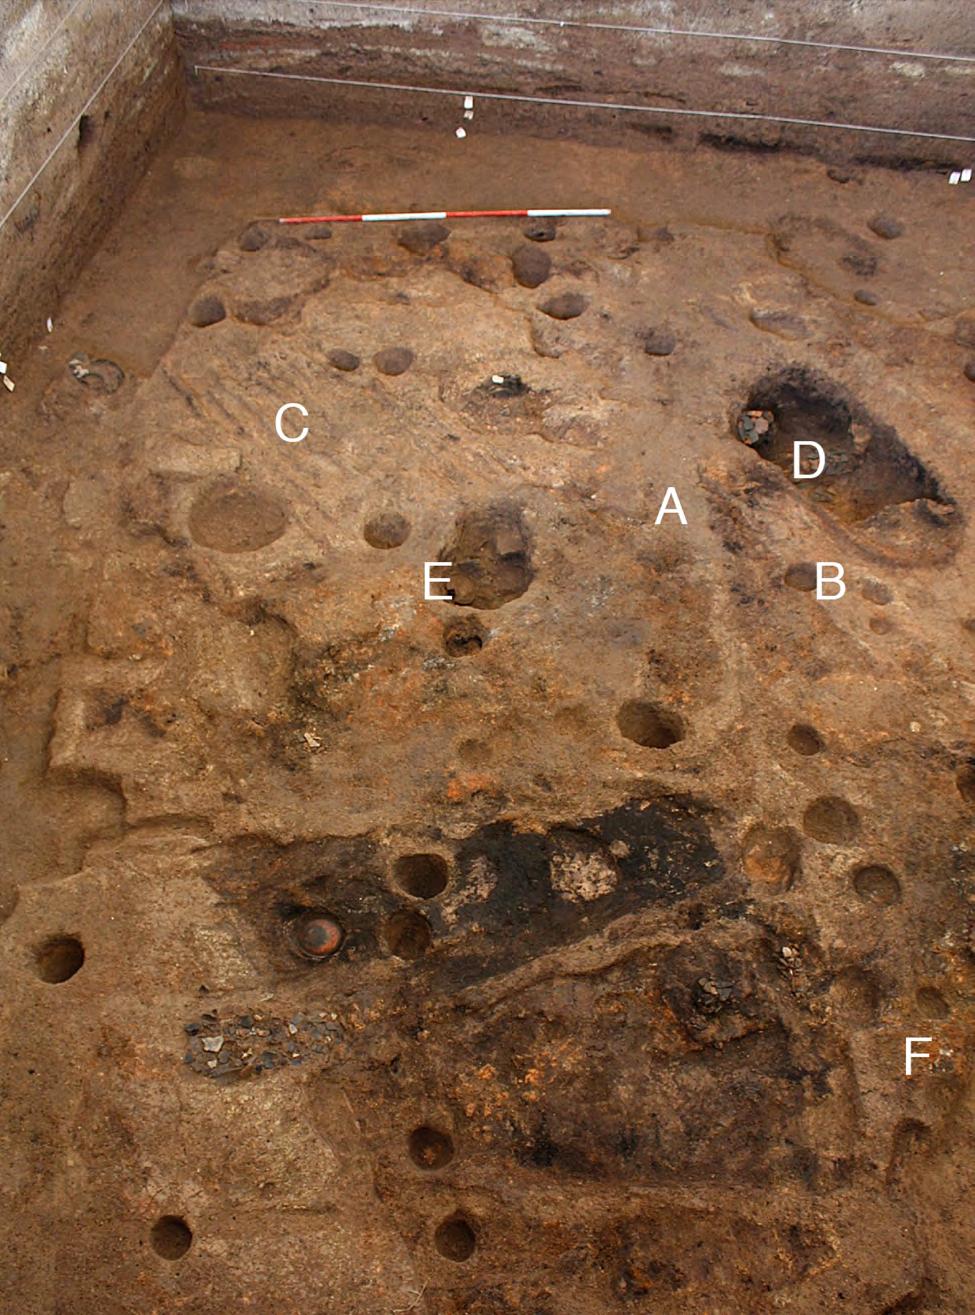 HIGHAM ET AL.: THE EXCAVATION OF NON BAN JAK, NORTHEAST THAILAND - A REPORT ON THE FIRST THREE SEASONS Figure 6: The surface of layer 5.